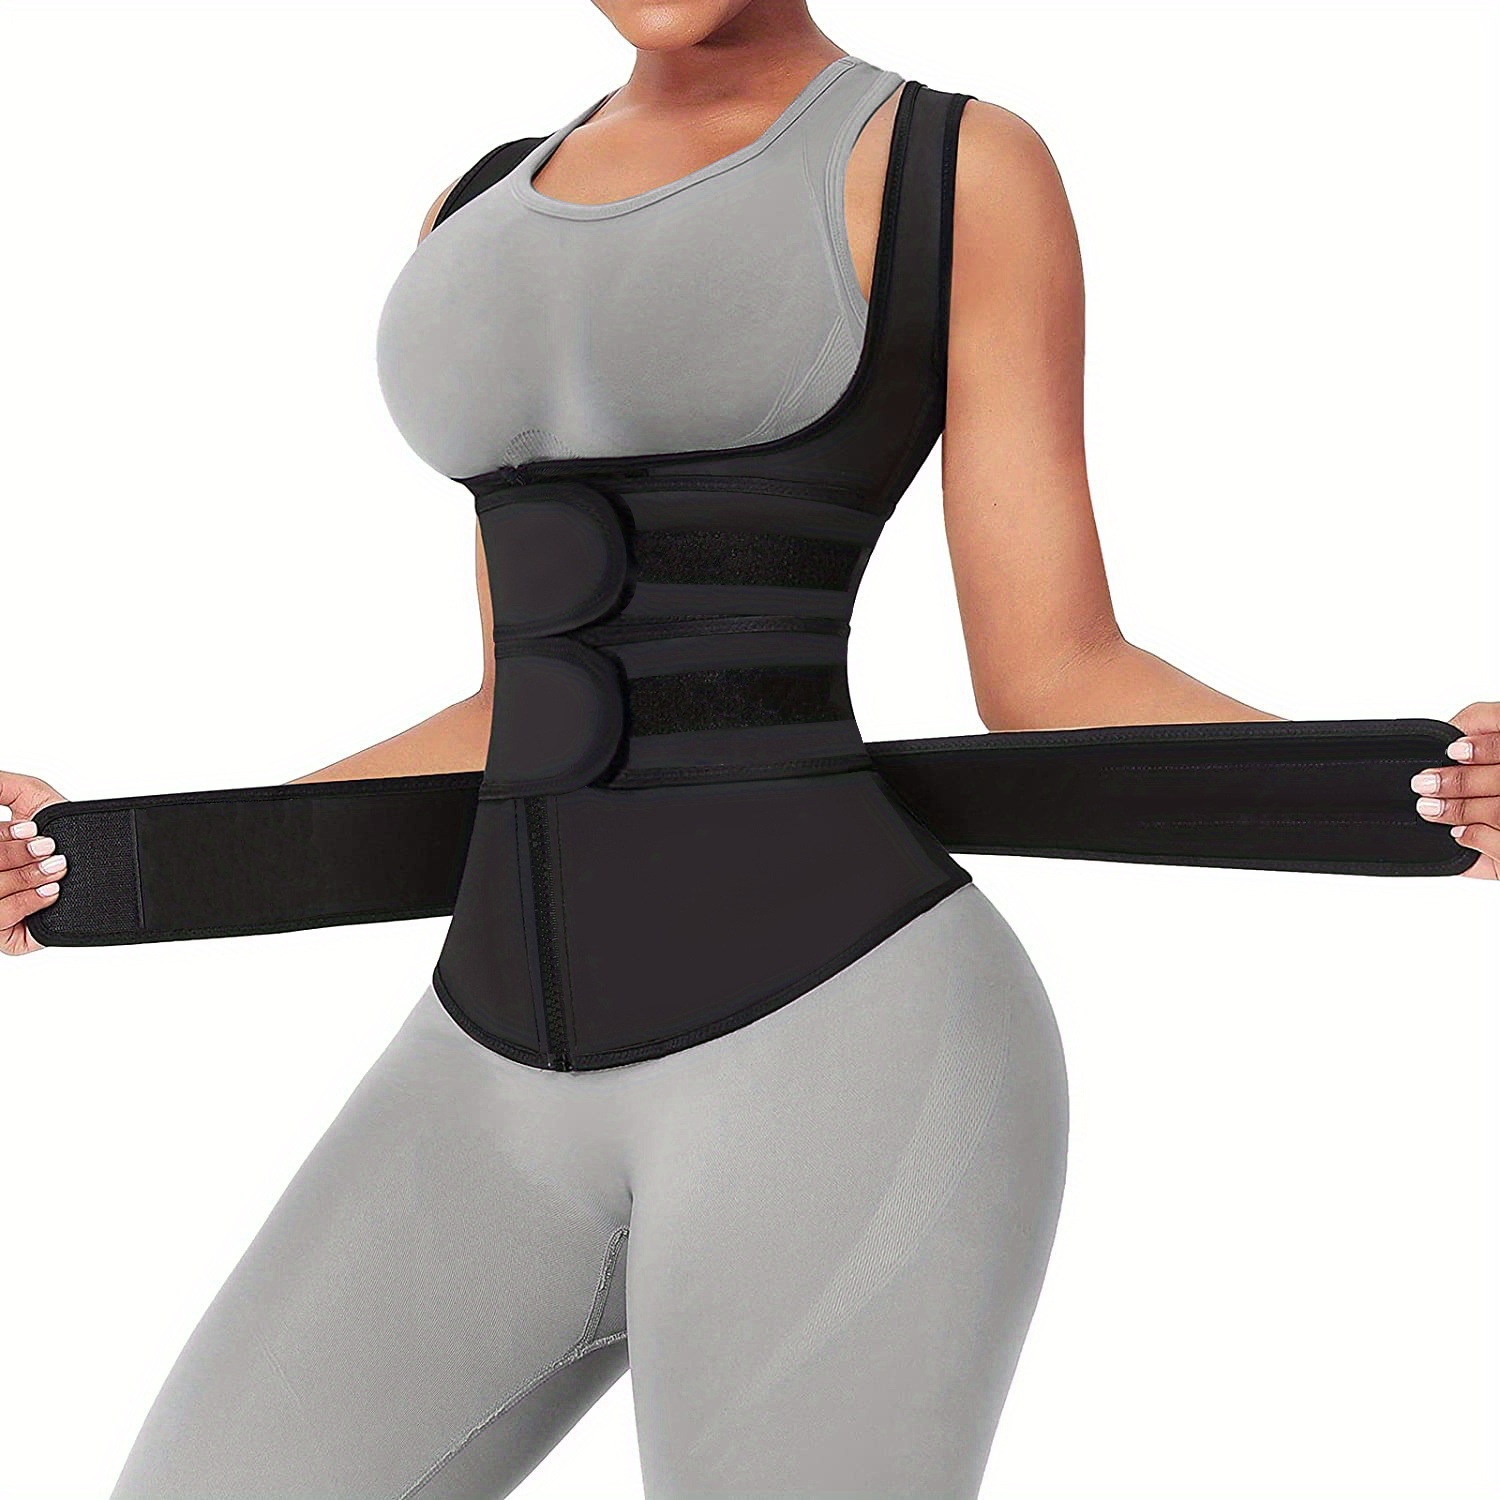 Products - Bodyshapers Lifestyle